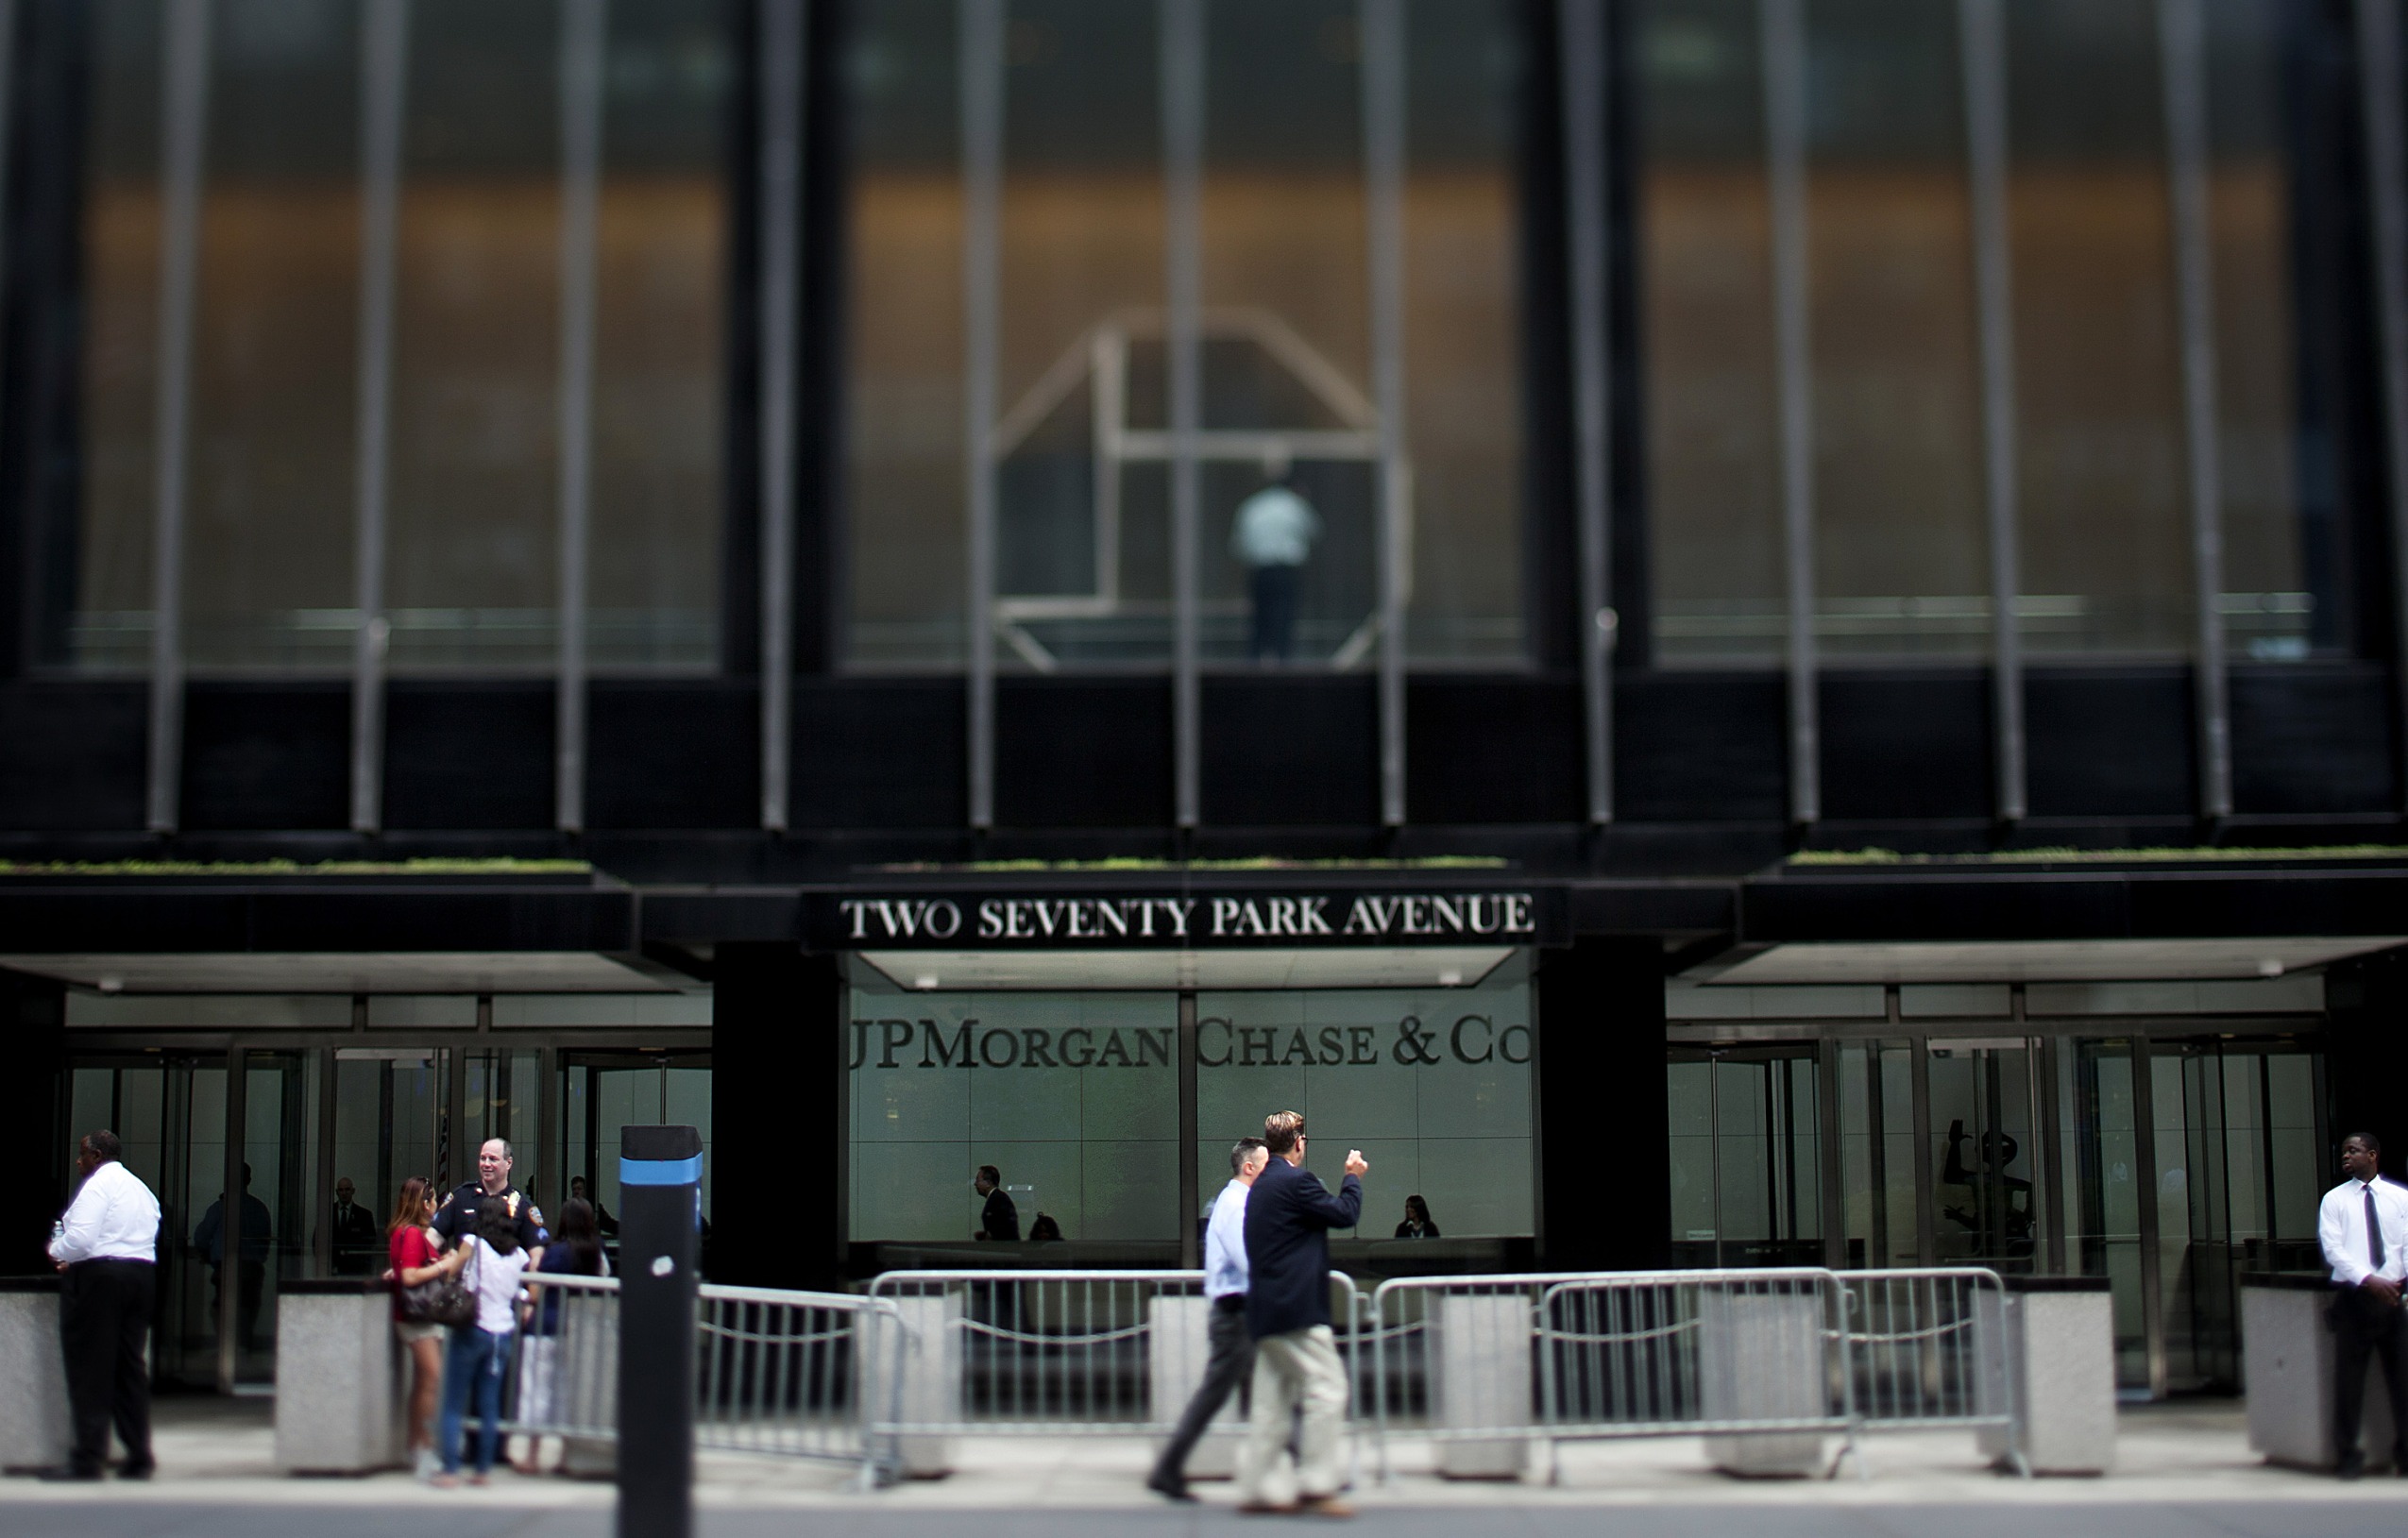 Pedestrians pass in front of the JPMorgan Chase & Co. headquarters in New York, U.S.